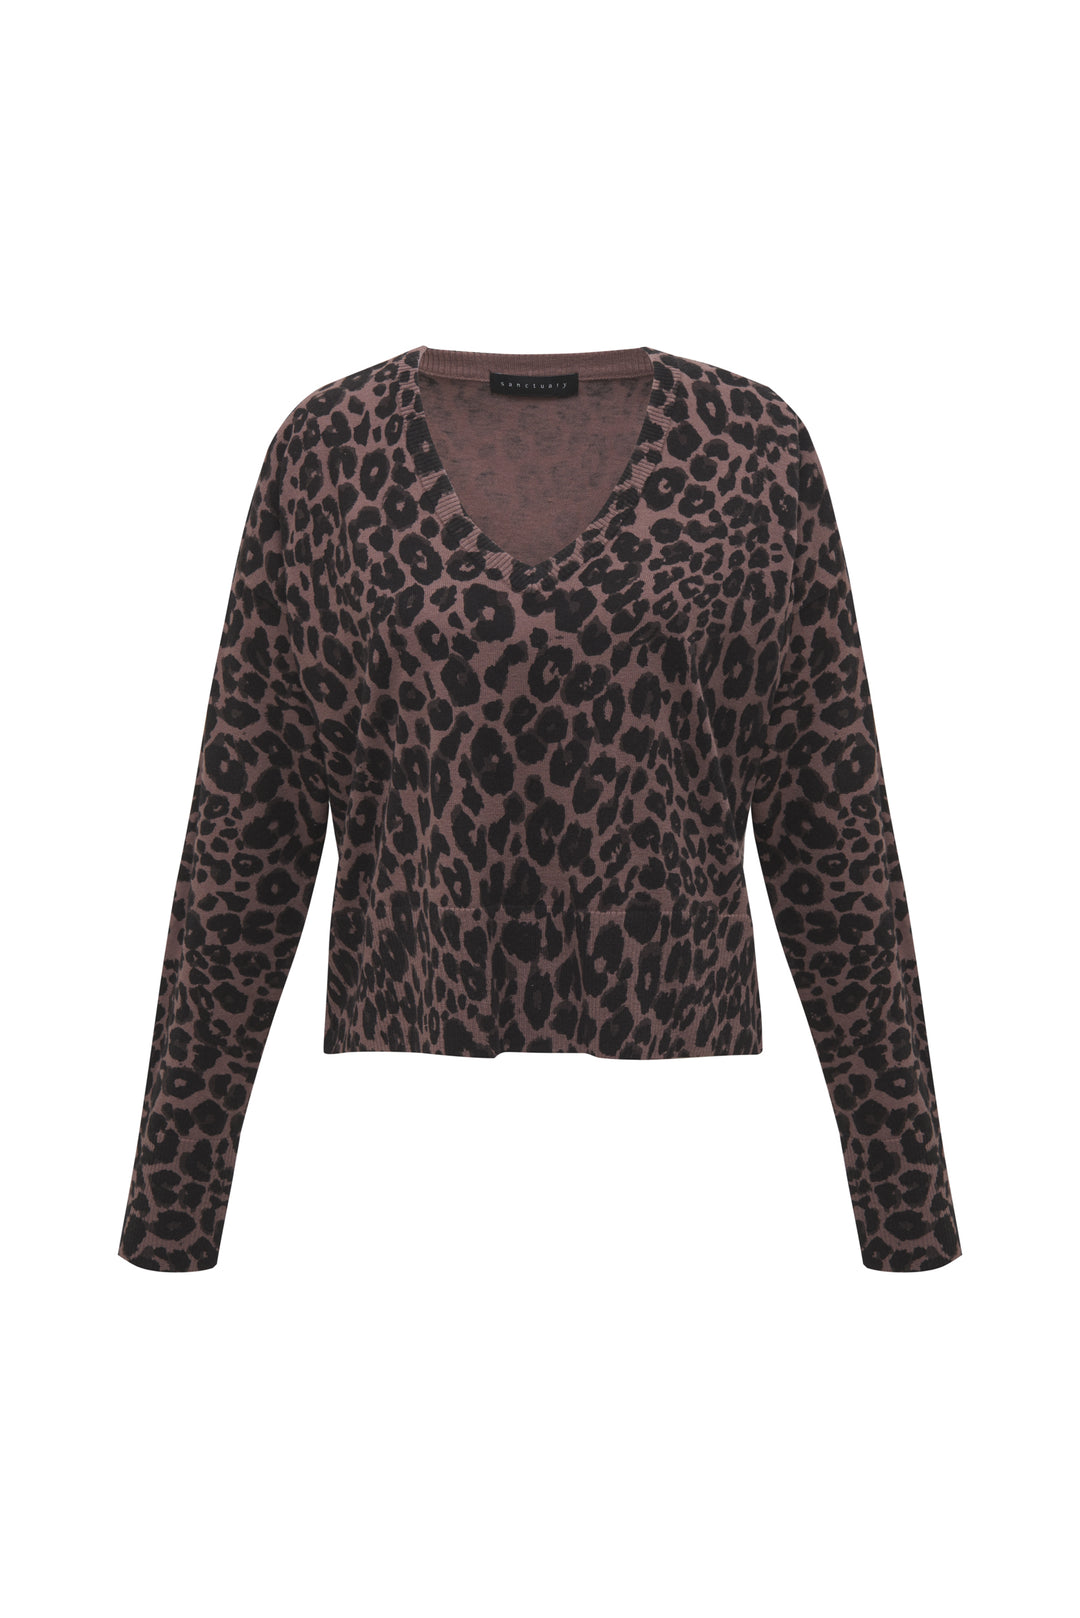 CLASSY MINK ESSENTIAL V-NECK CROP SWEATER - Kingfisher Road - Online Boutique